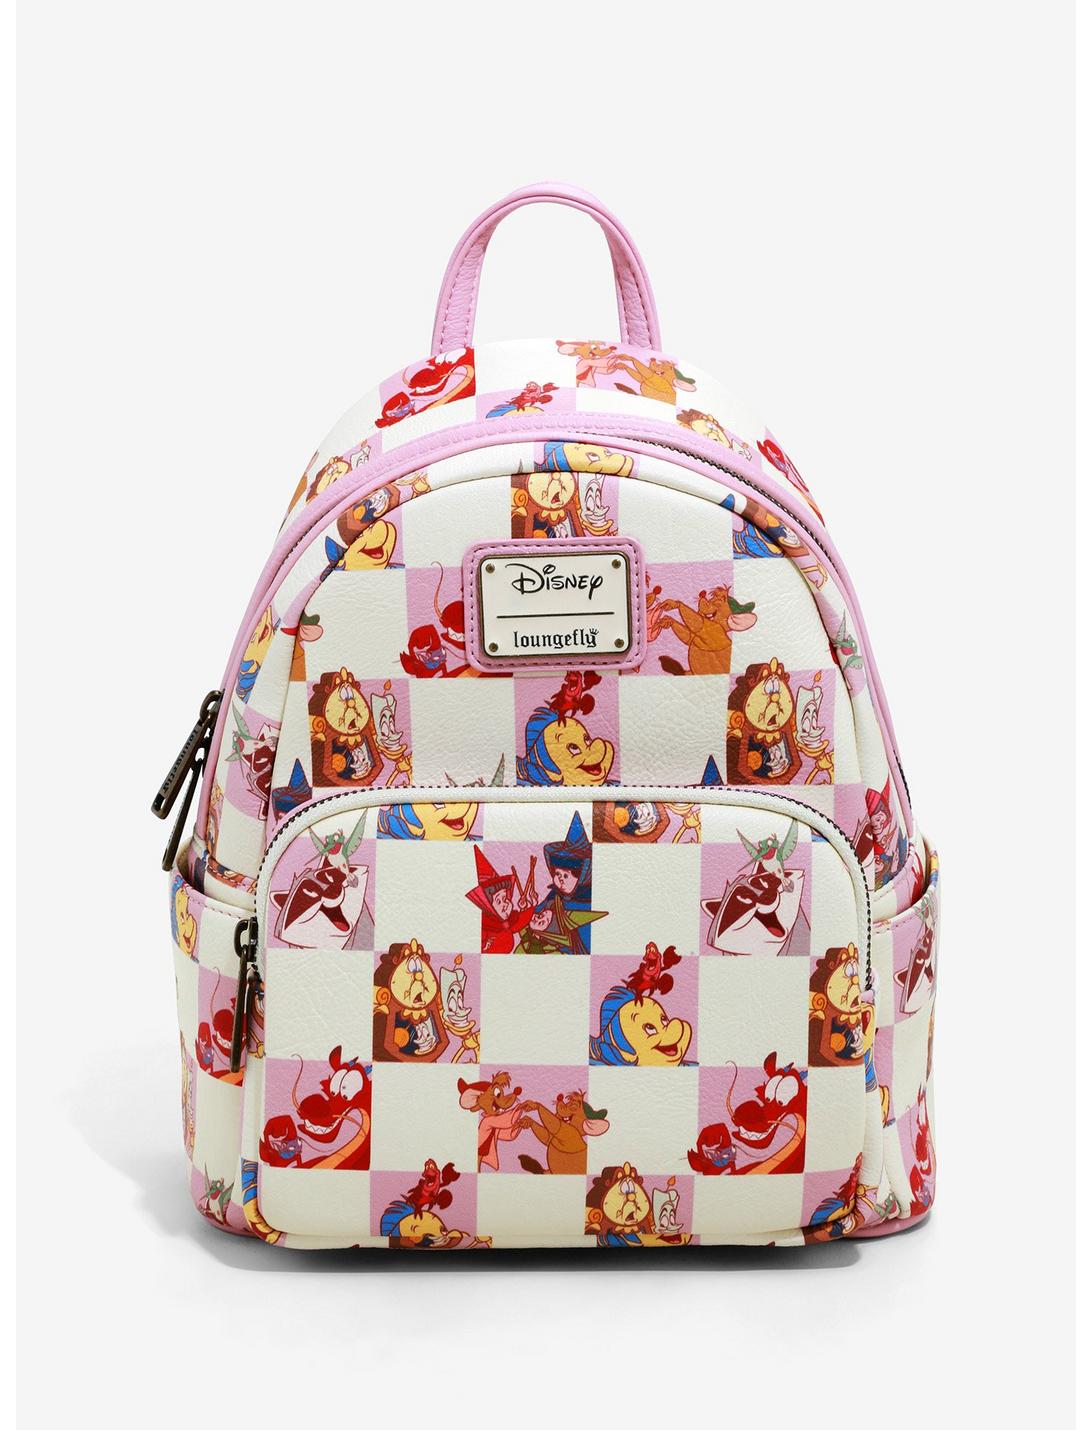 Loungefly Disney Checkered Friends Mini Backpack, , hi-res